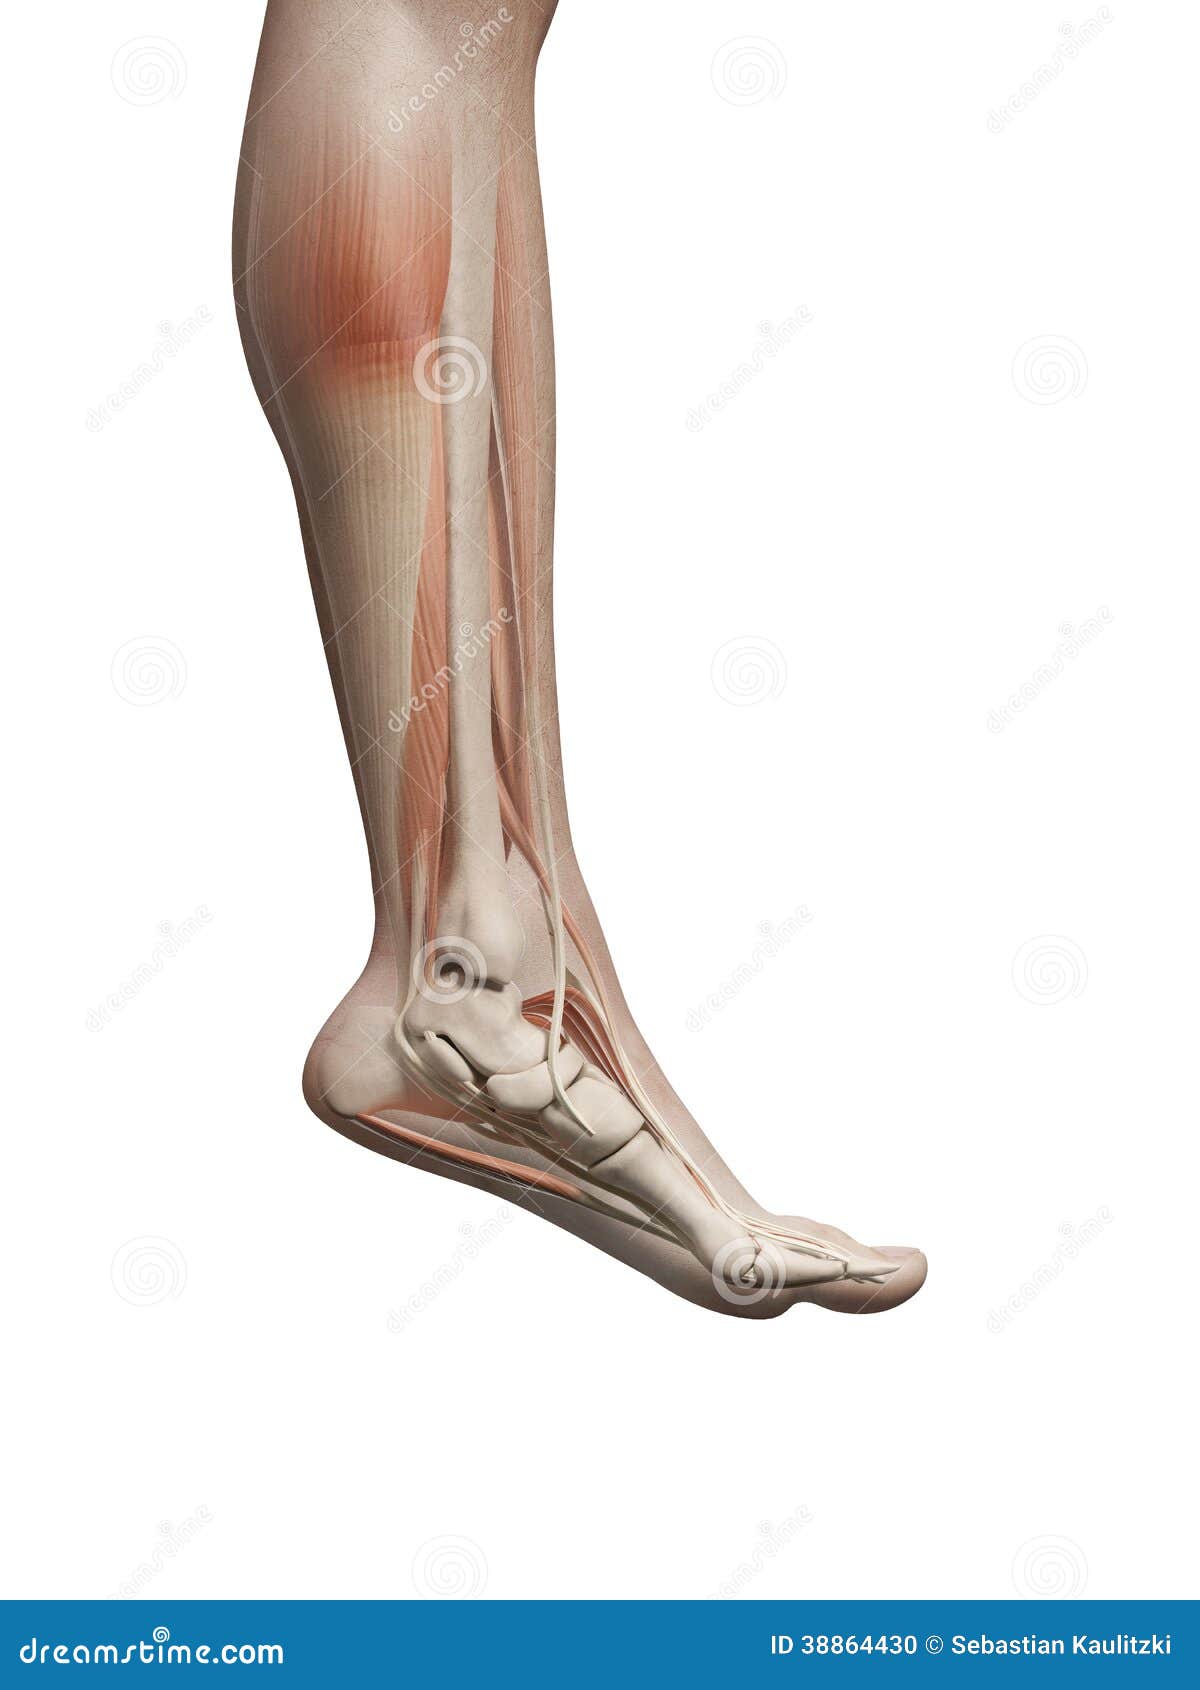 The Male Leg Muscles Stock Illustration - Image: 38864430